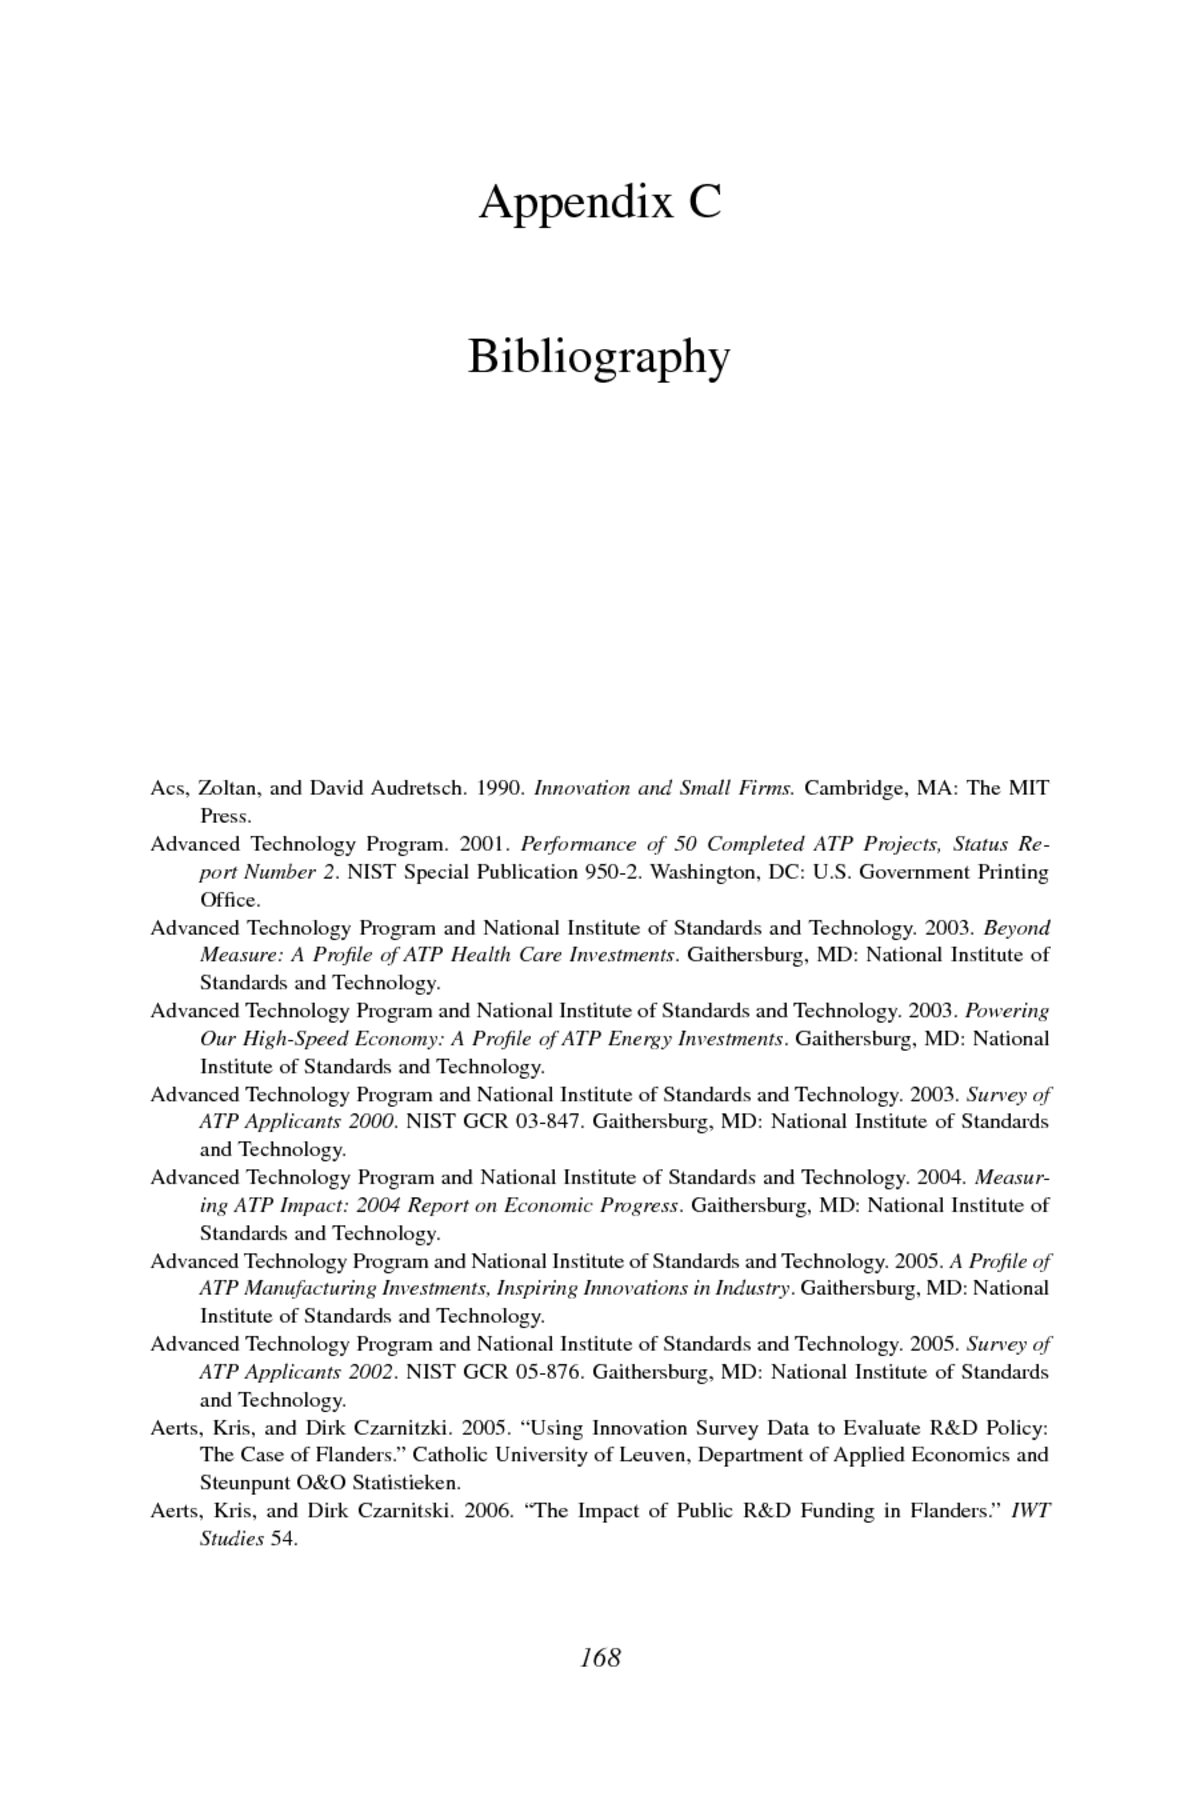 Appendix C: Bibliography  Understanding Research, Science and